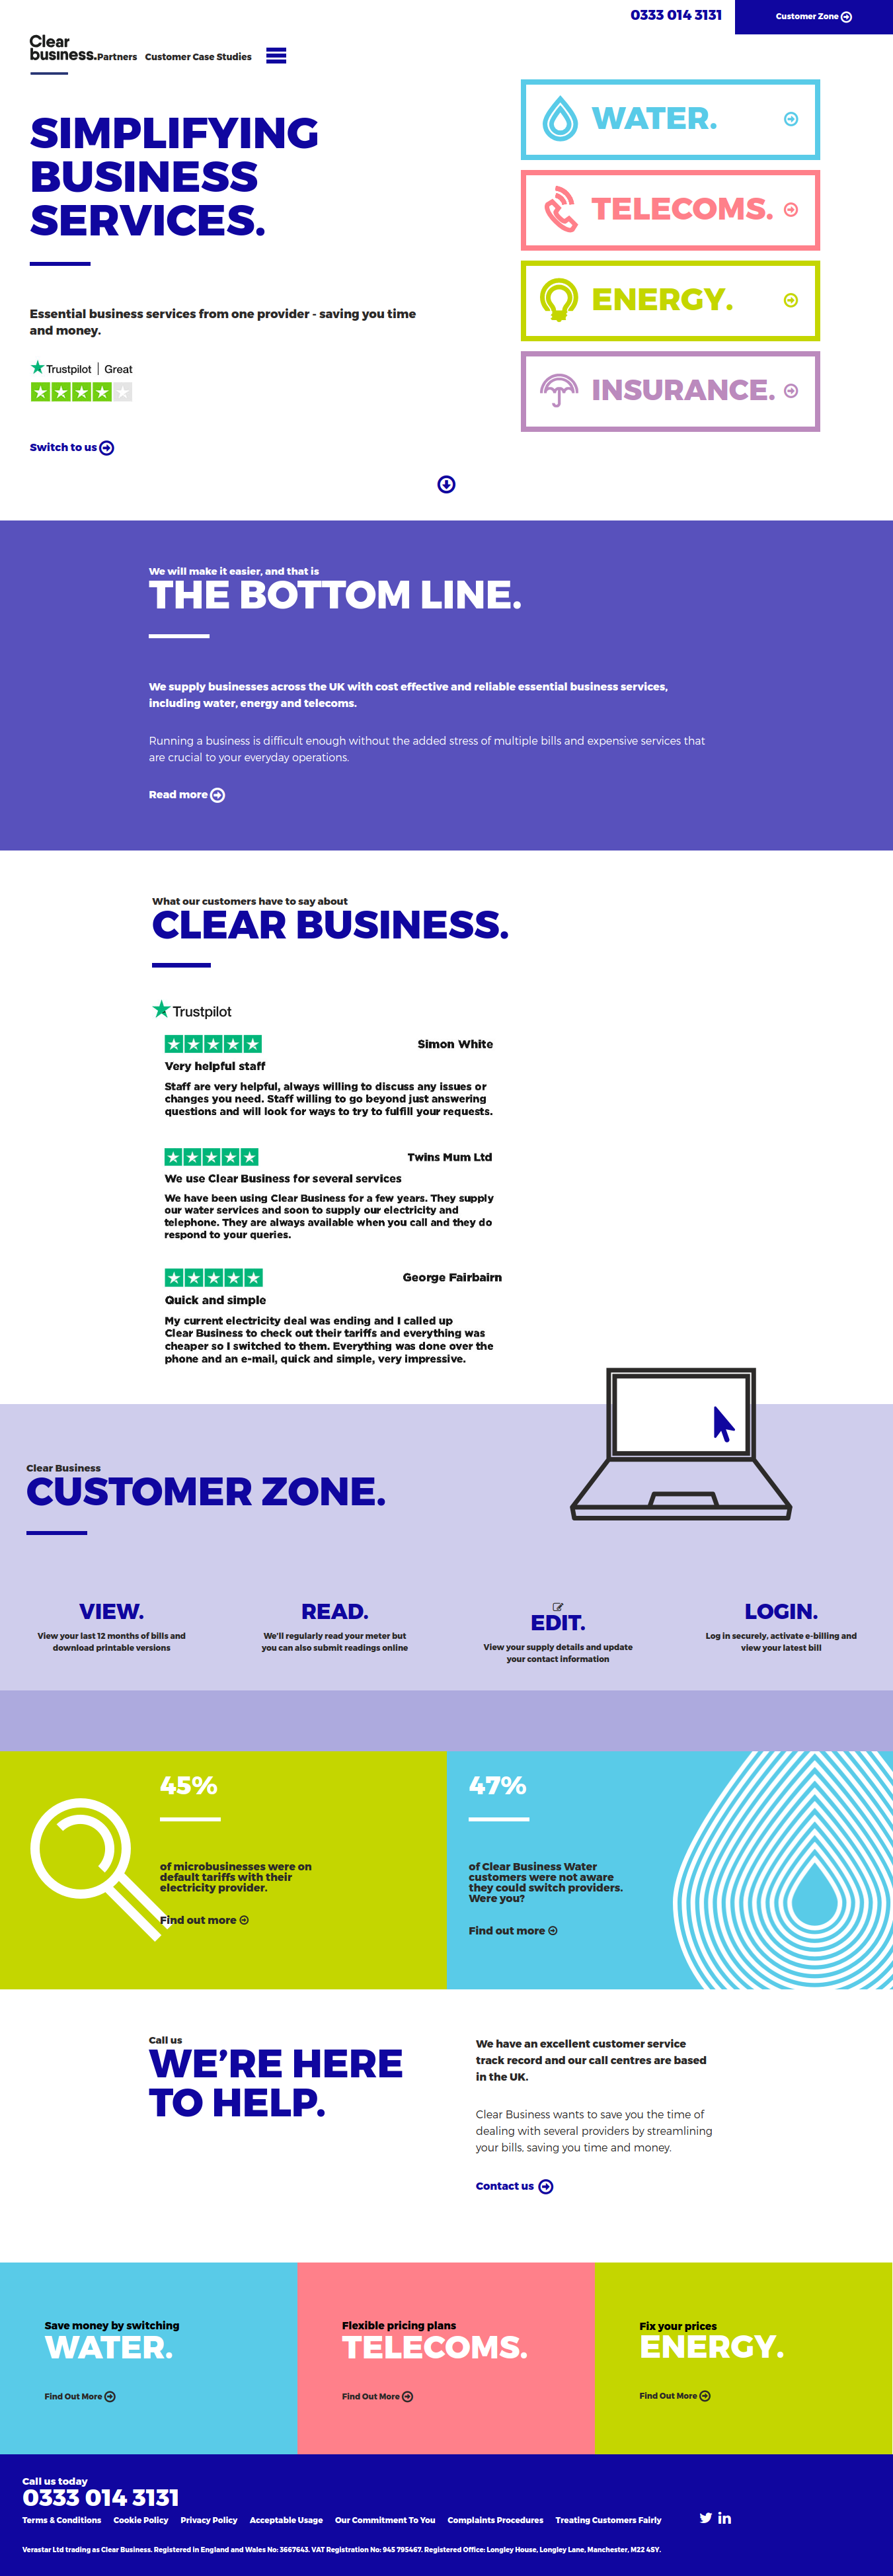 Clear Business UK